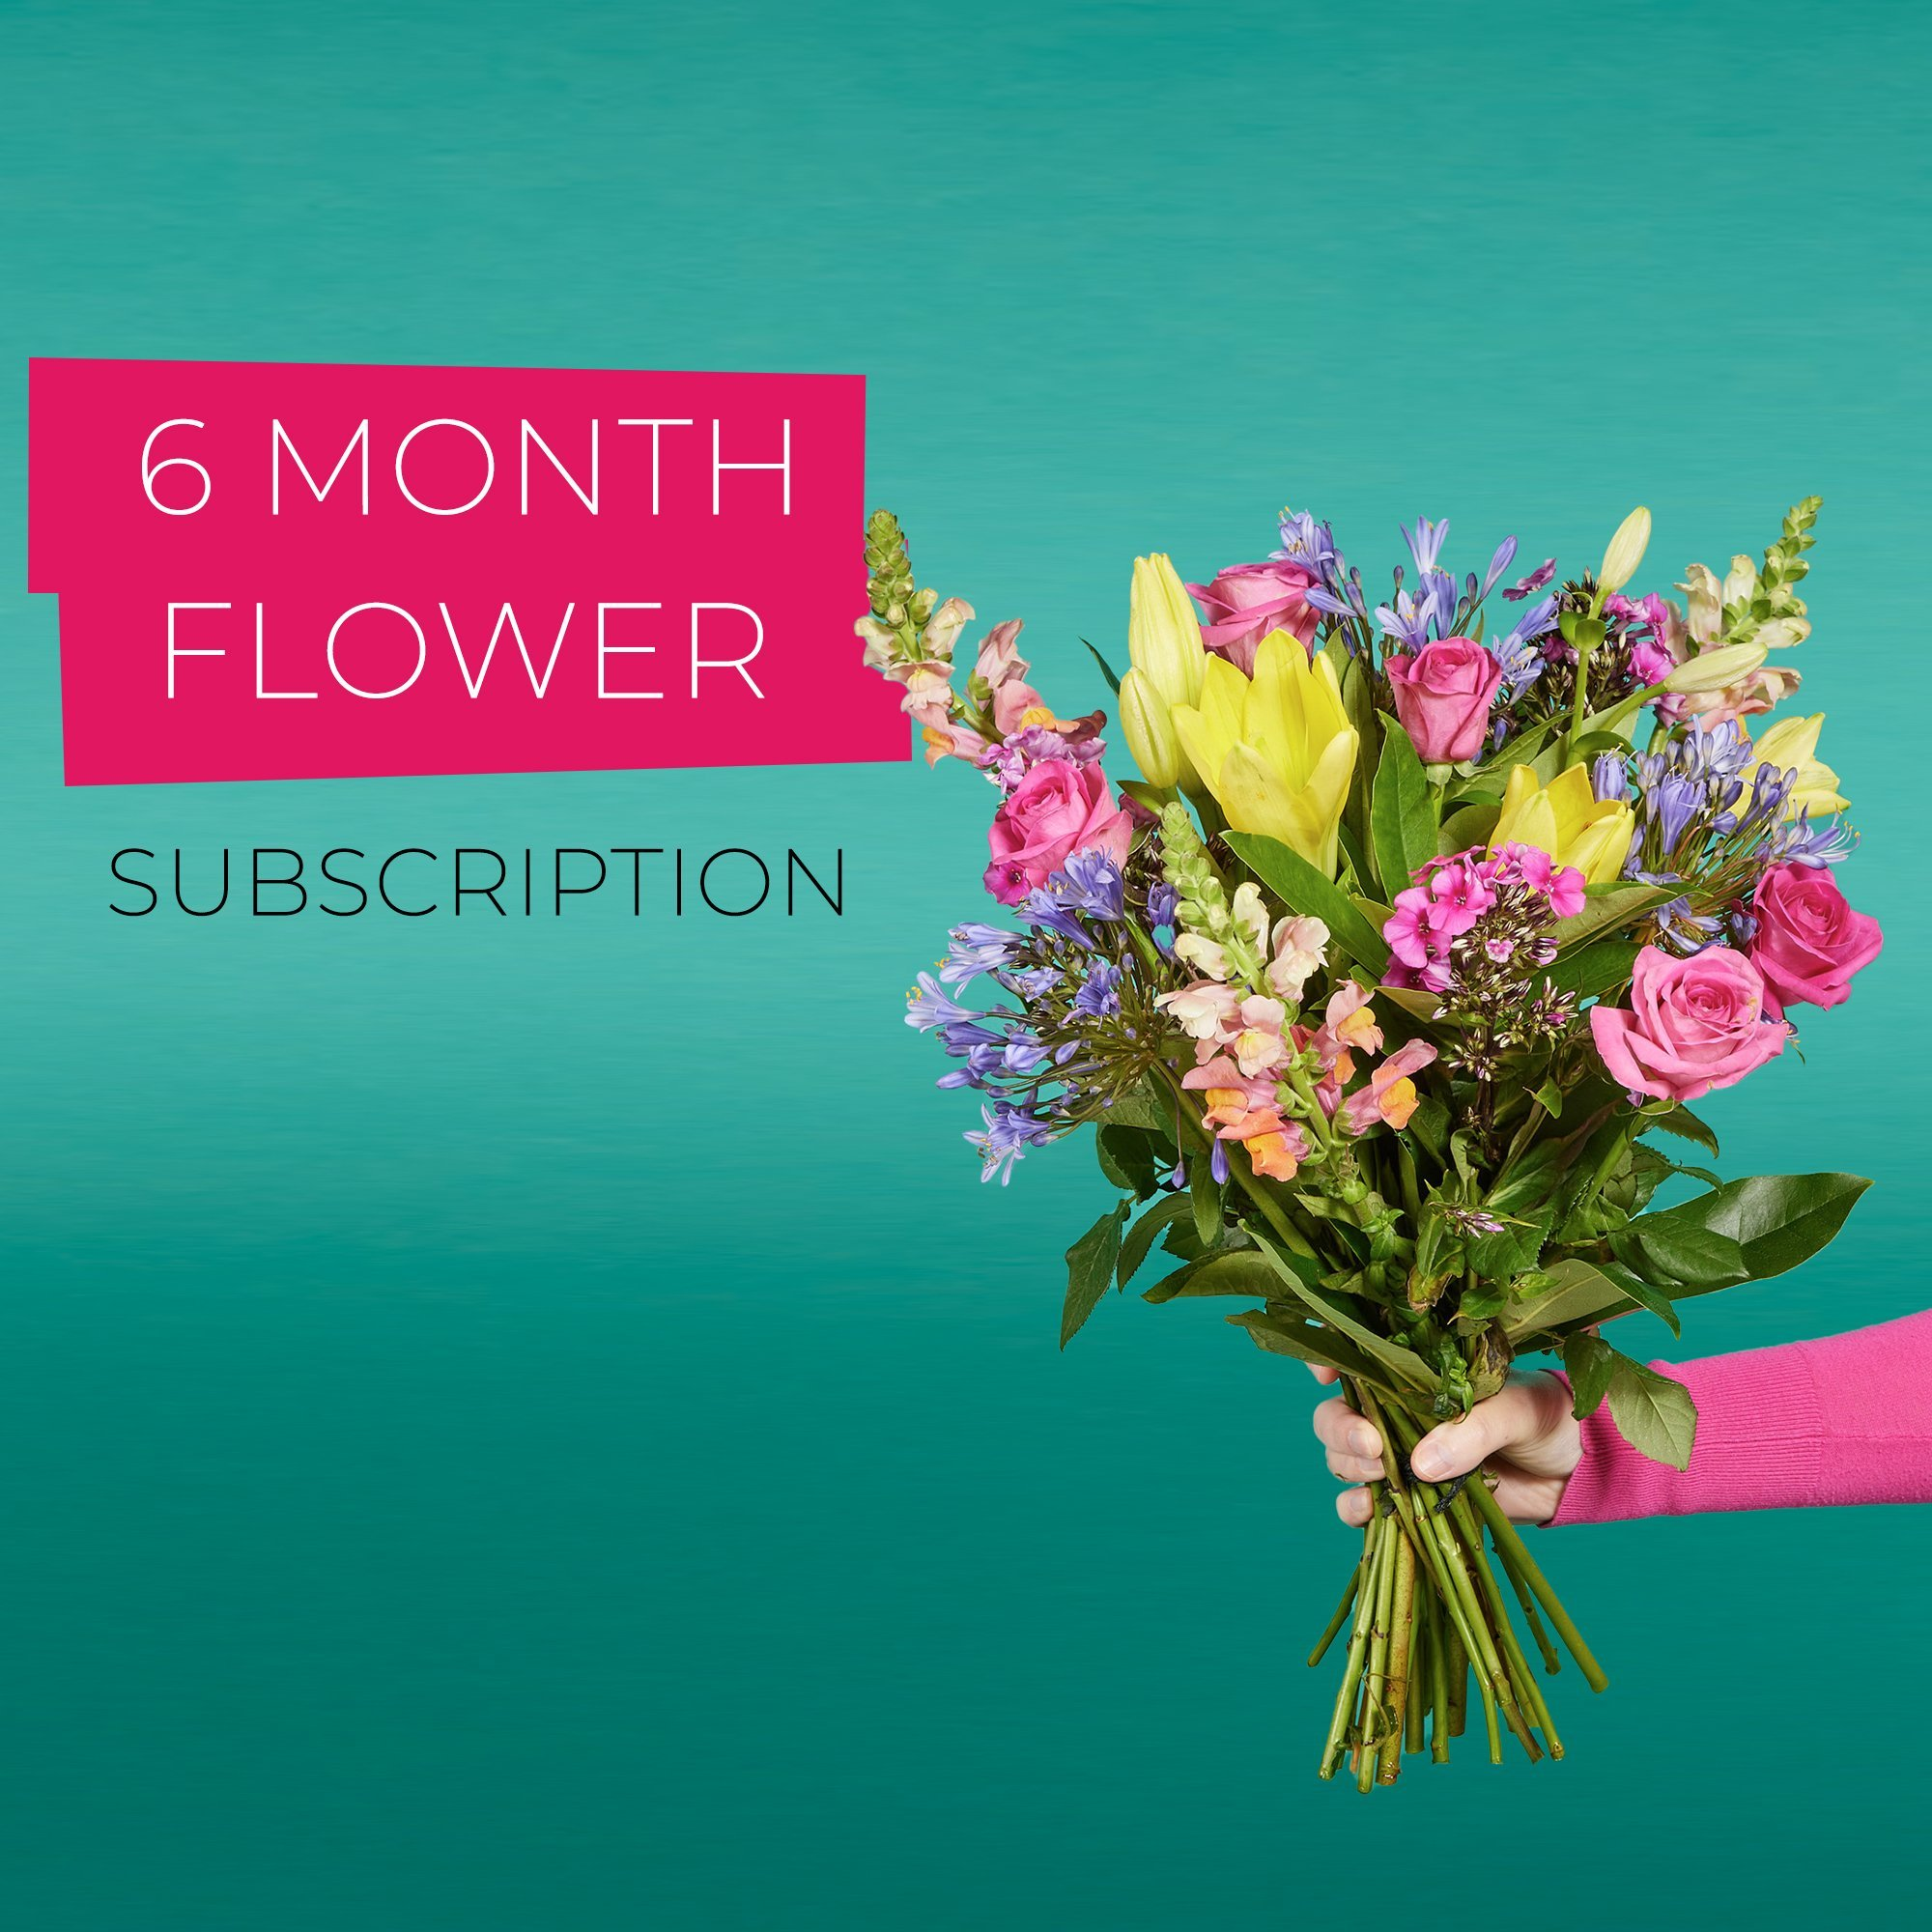 6 Month Flower Subscription image